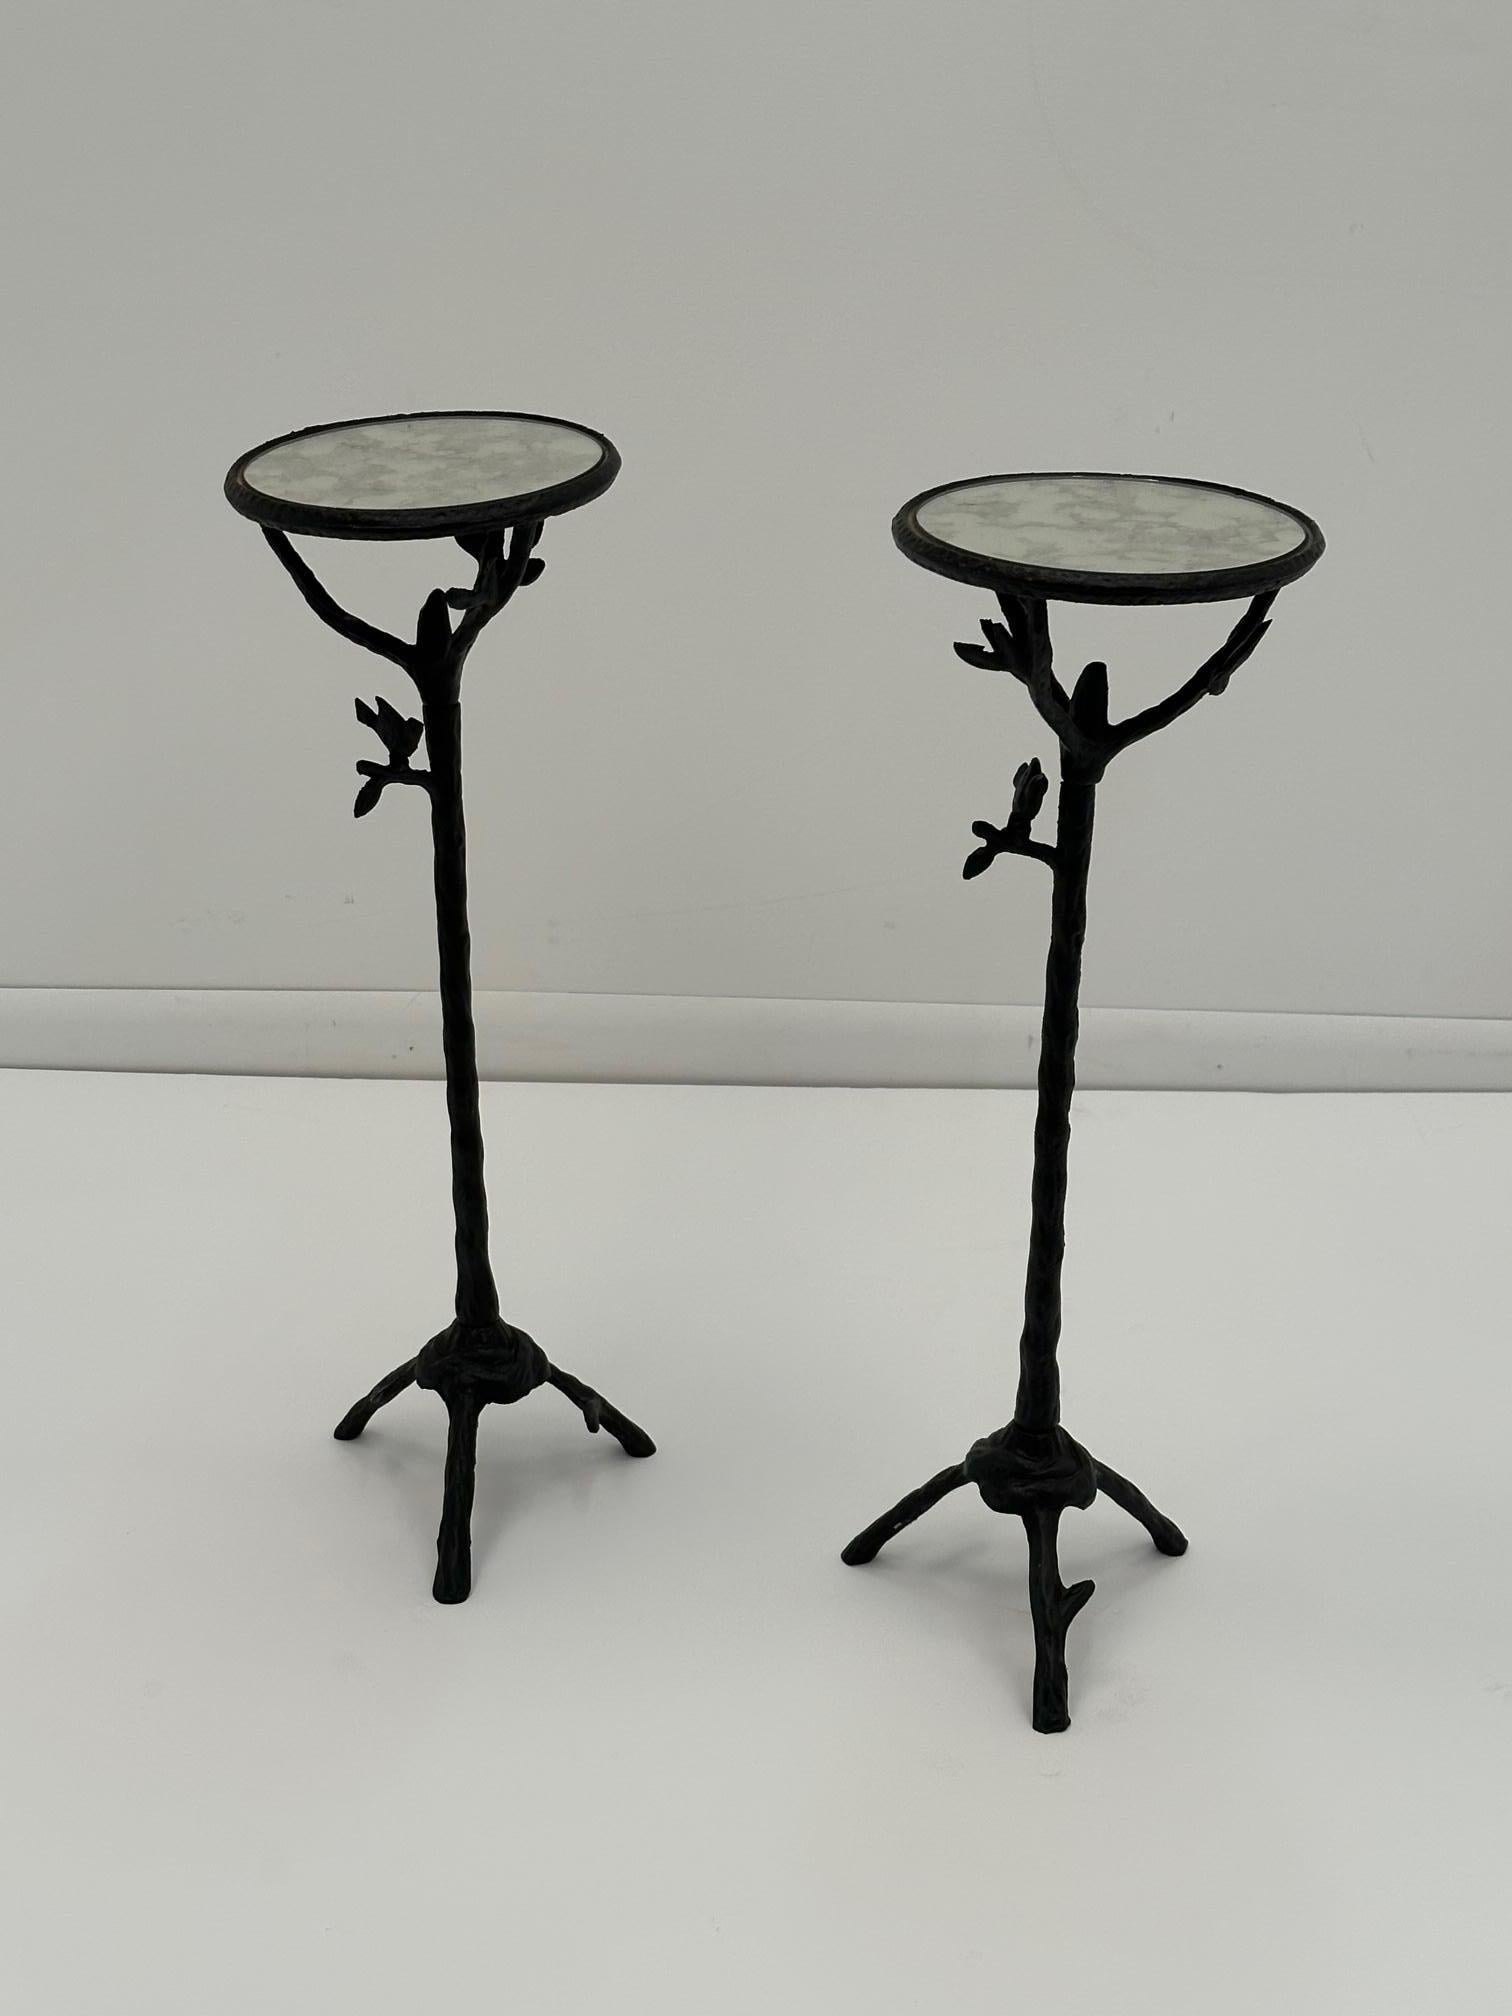 Organic Modern Whimsical Pair of Iron Martini Side Tables with Twig and Bird Motif